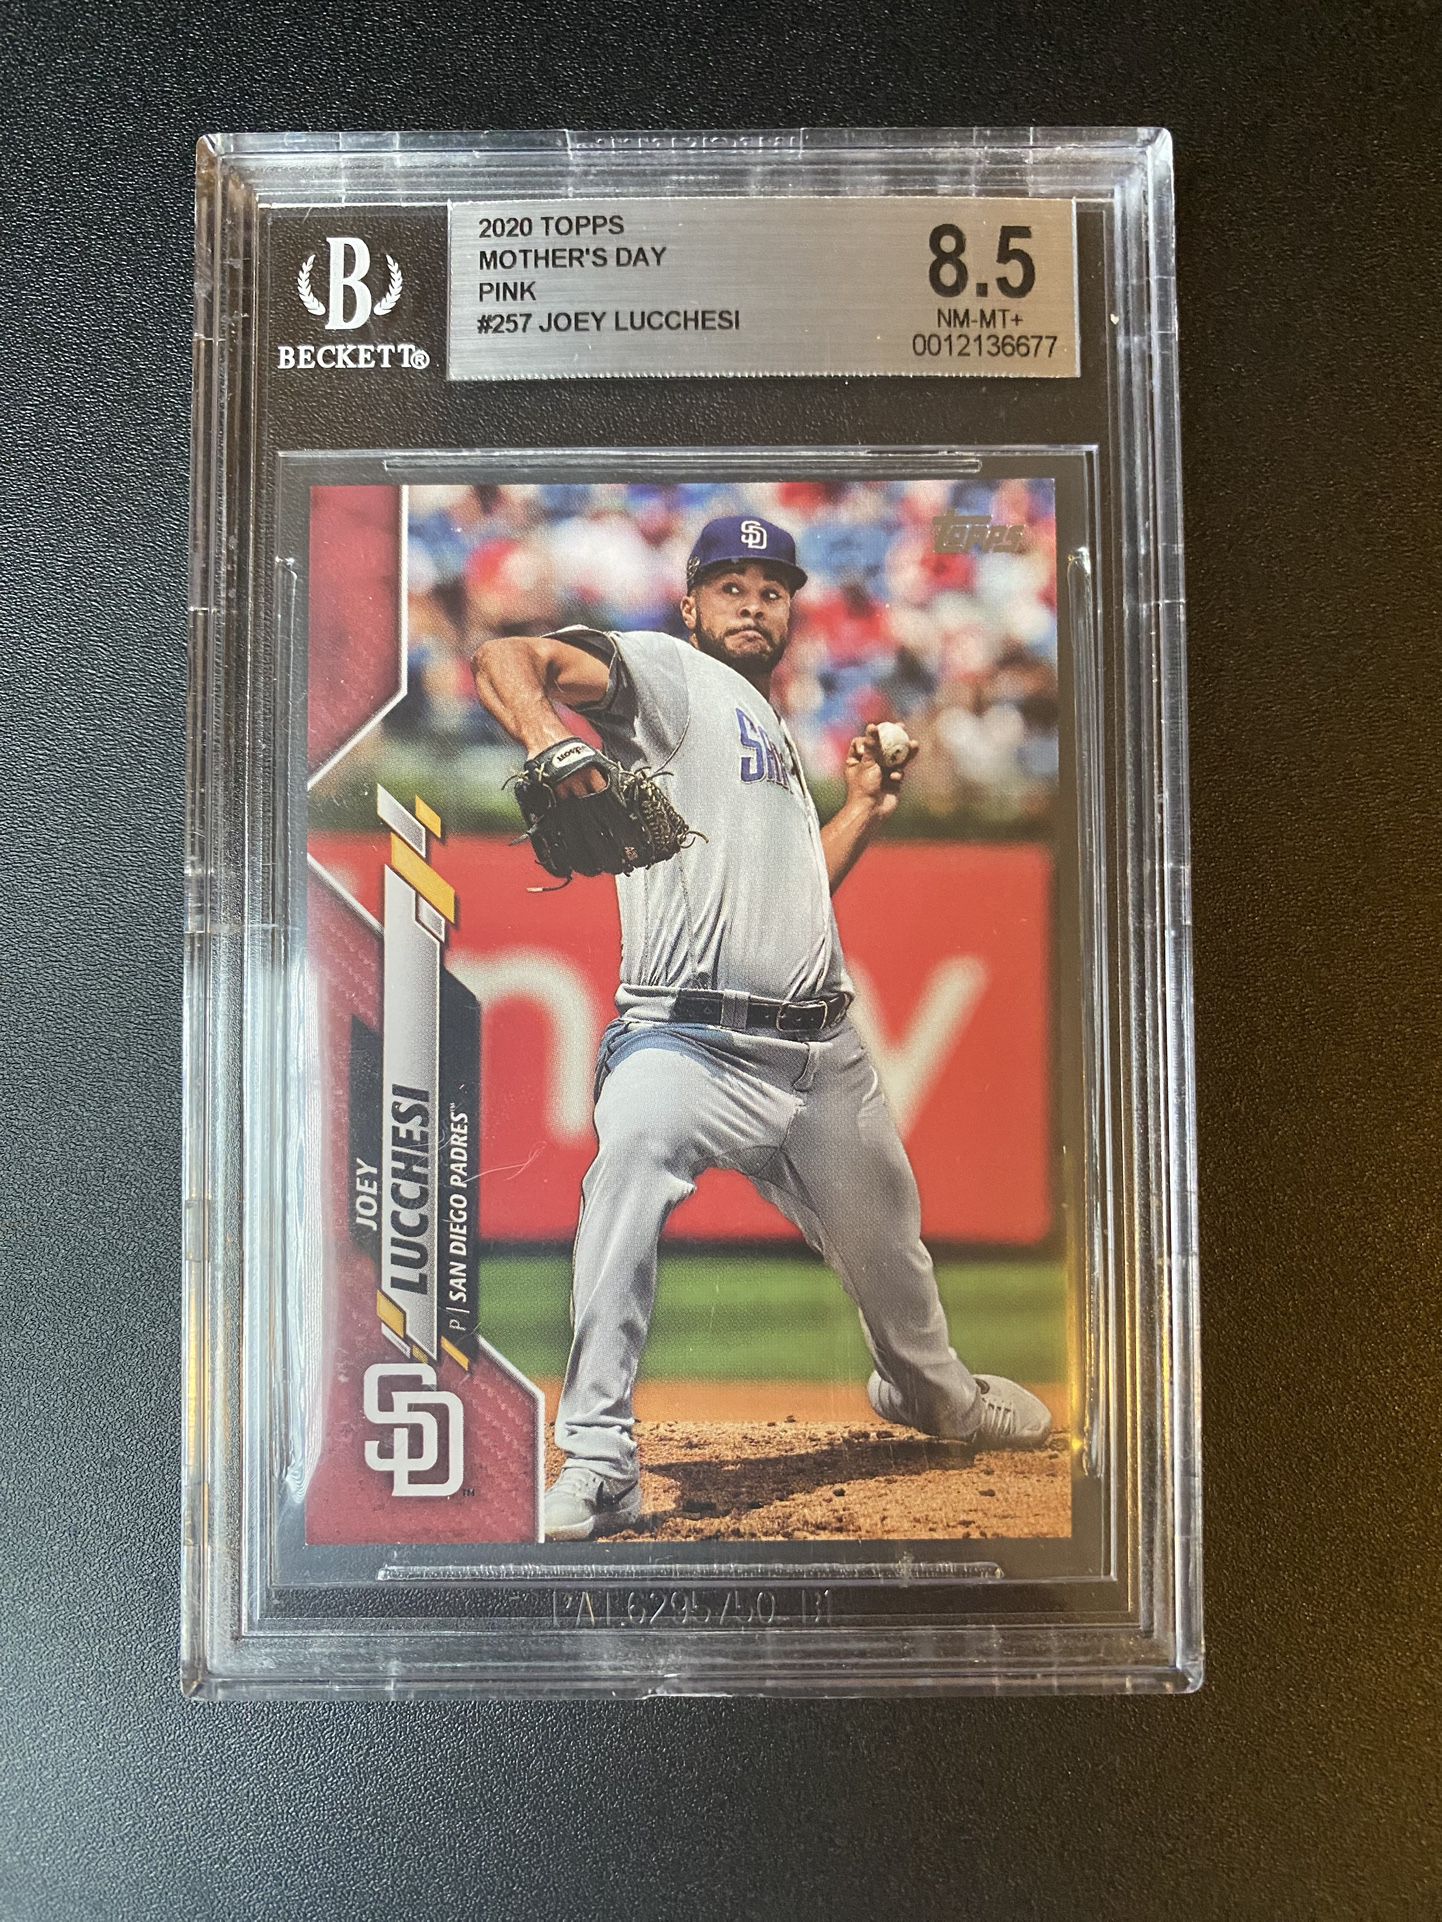 2020 Topps Mothers Day Pink Joey Lucchesi #257 /50 BGS 8.5